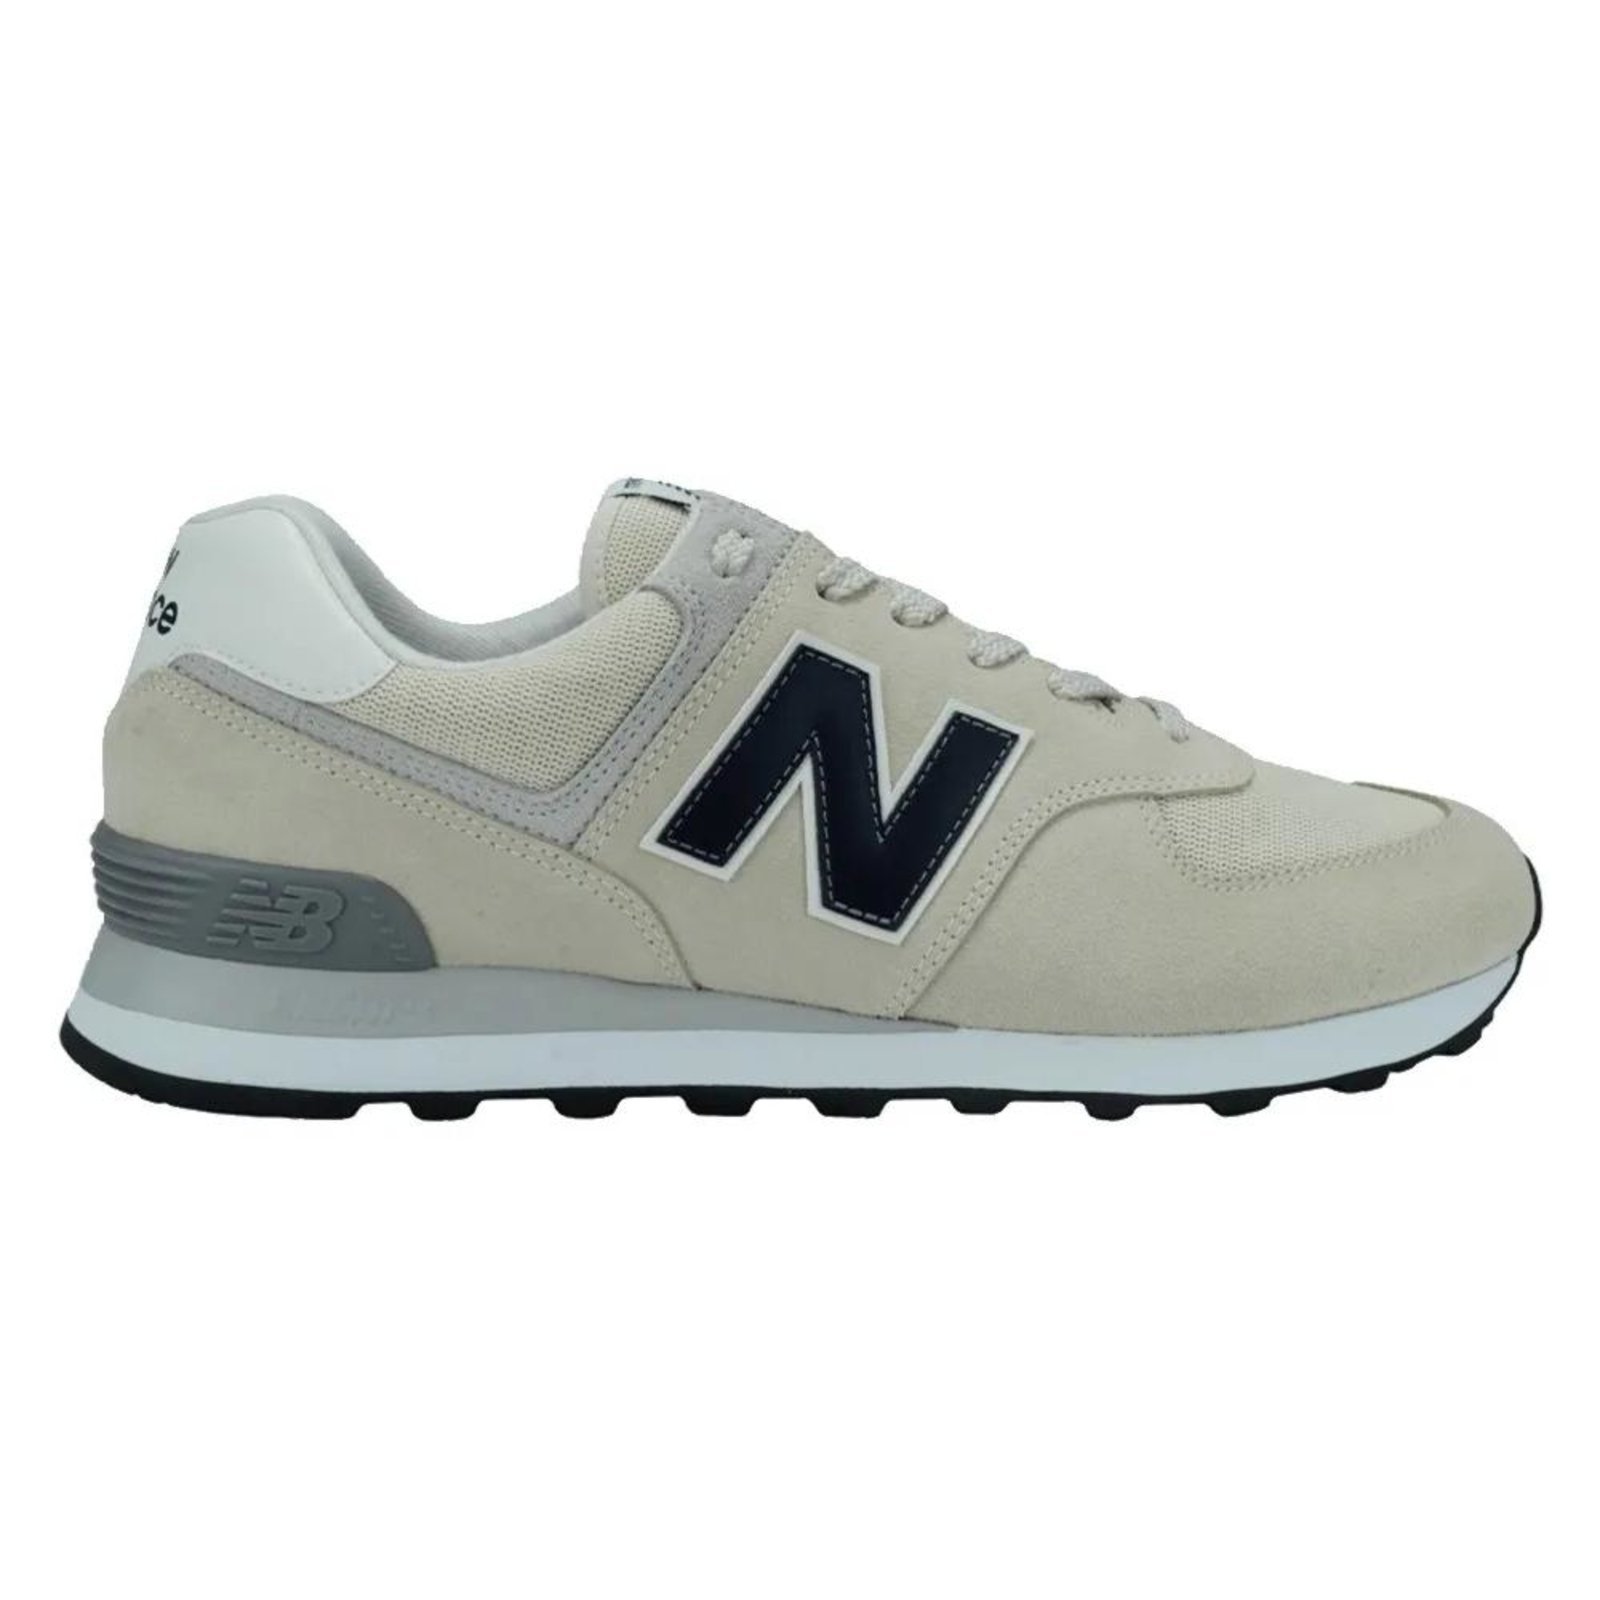 New Balance 574 Masculino Tennis Shoes: The Ultimate Style Statement for Men's Tennis